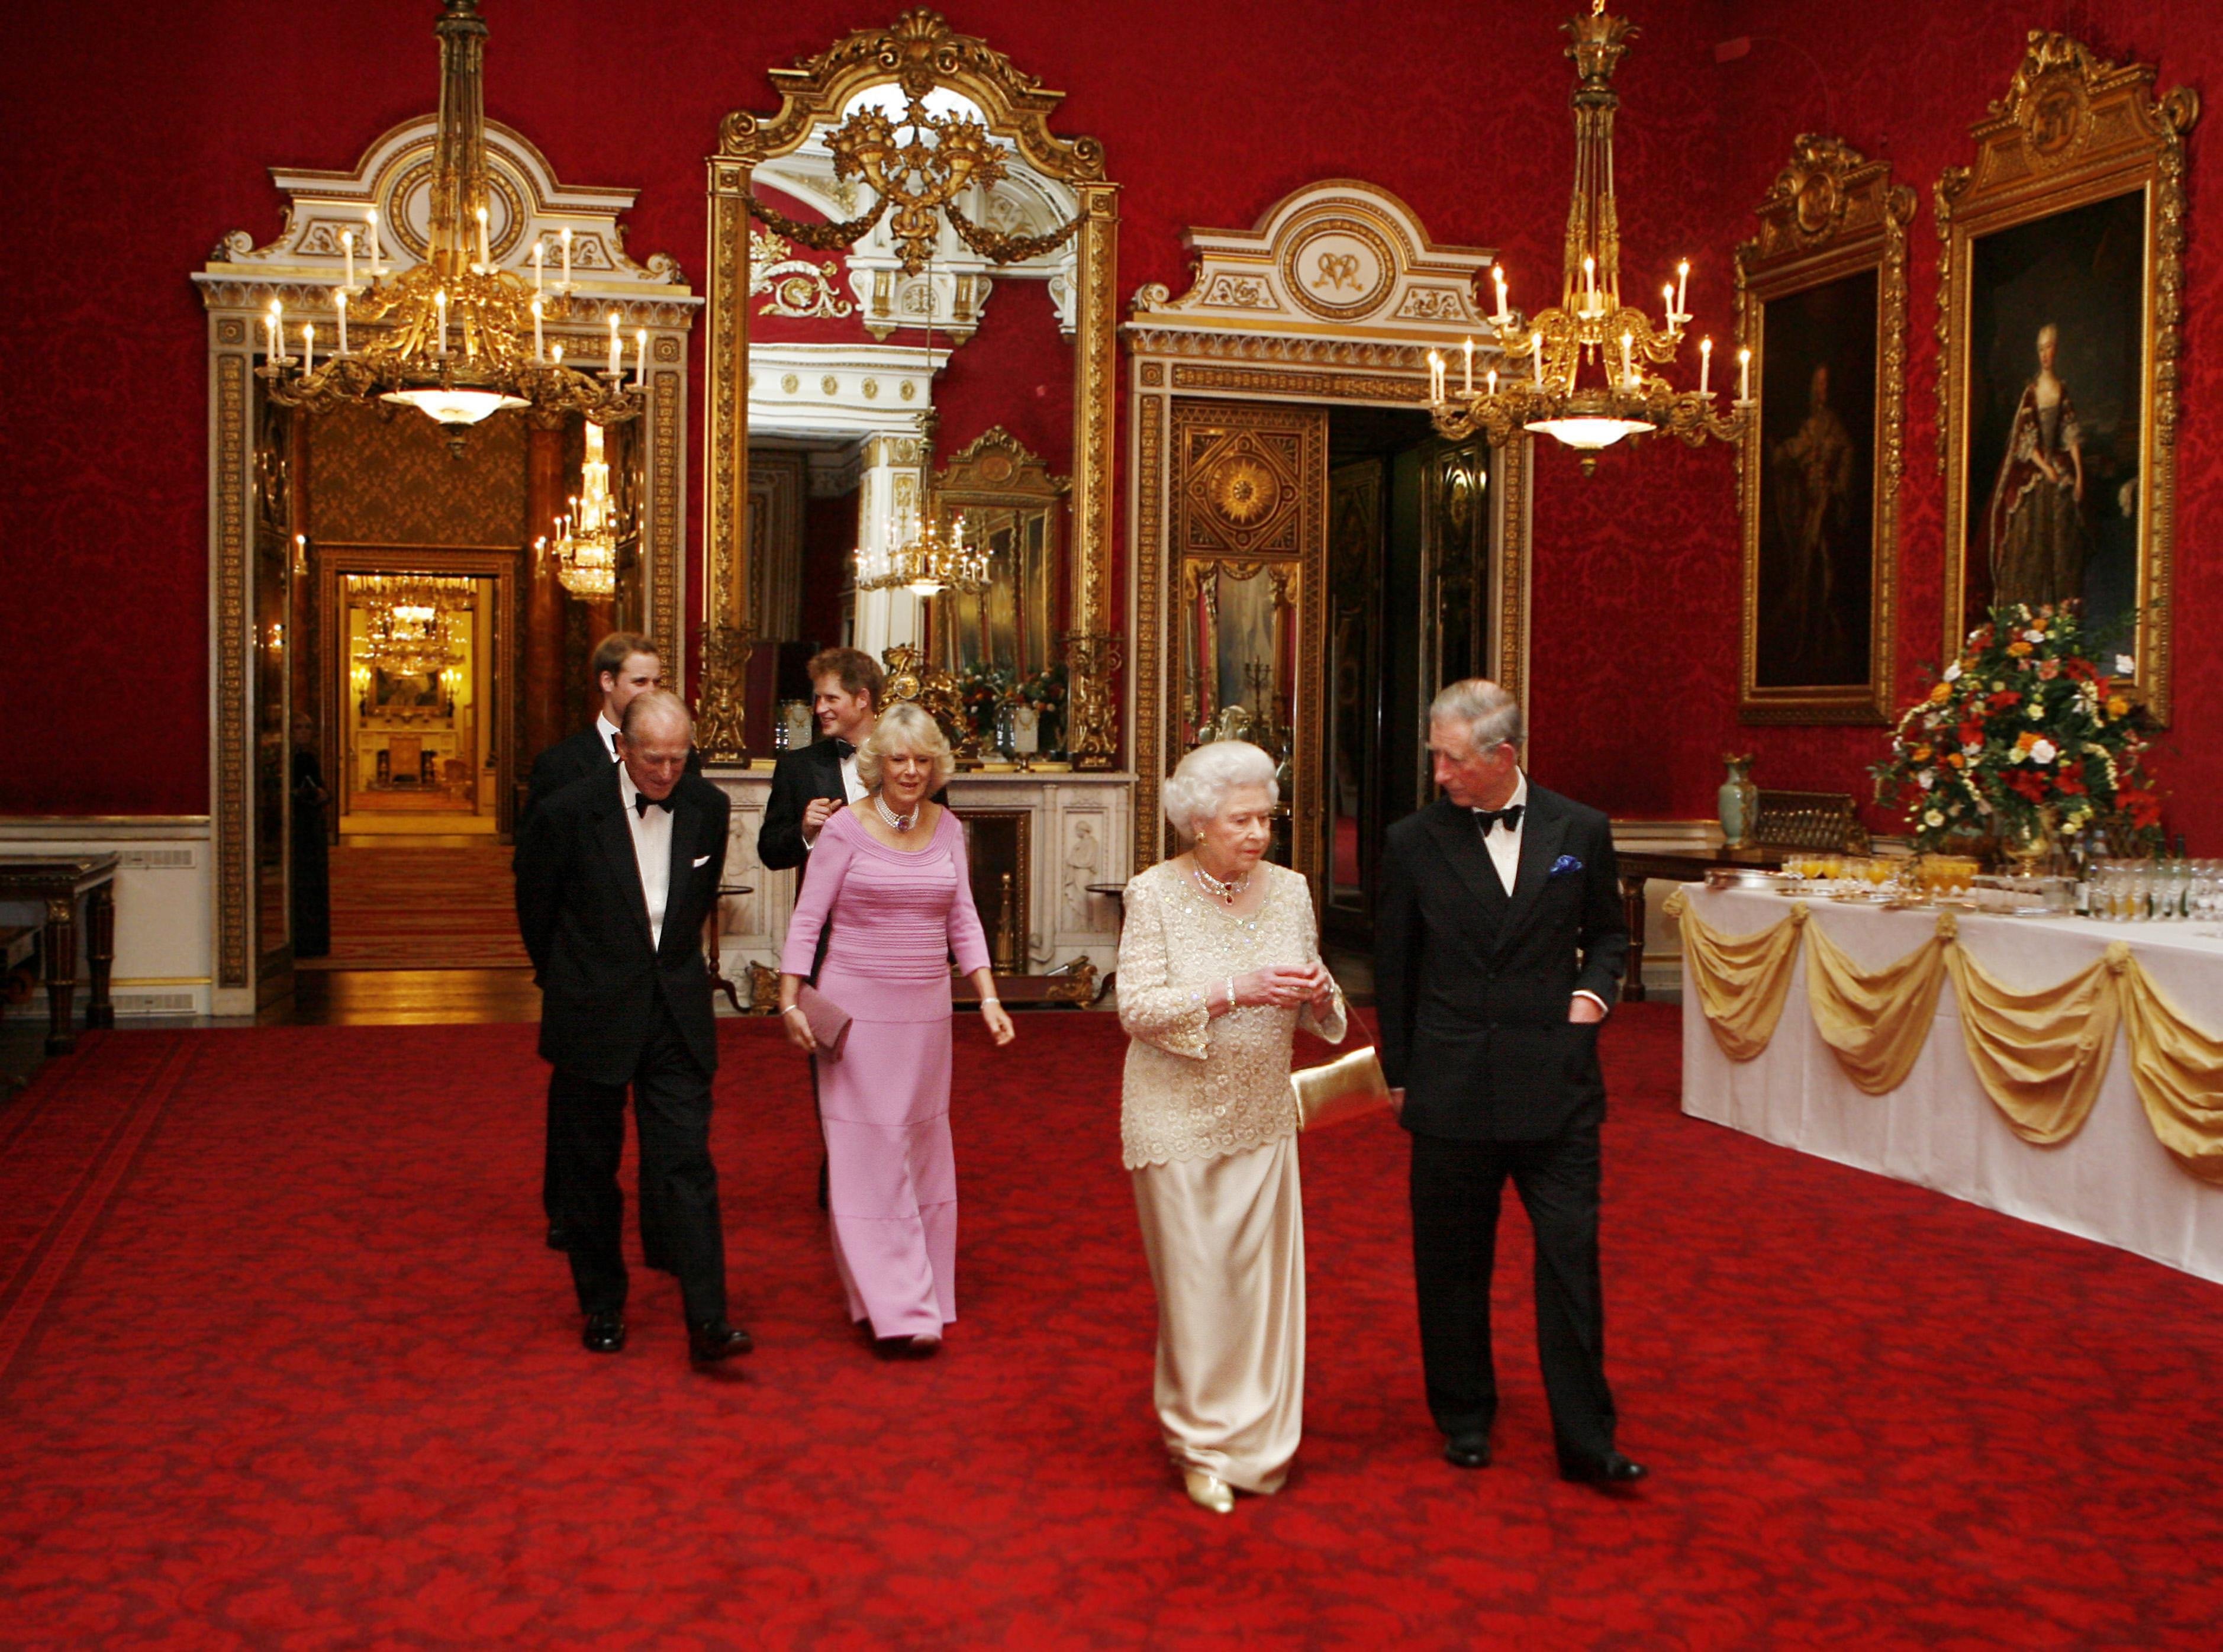 Royal Staffers Reveal They Must Follow Strict Rule About Where and How to Walk on Buckingham Palace Carpet